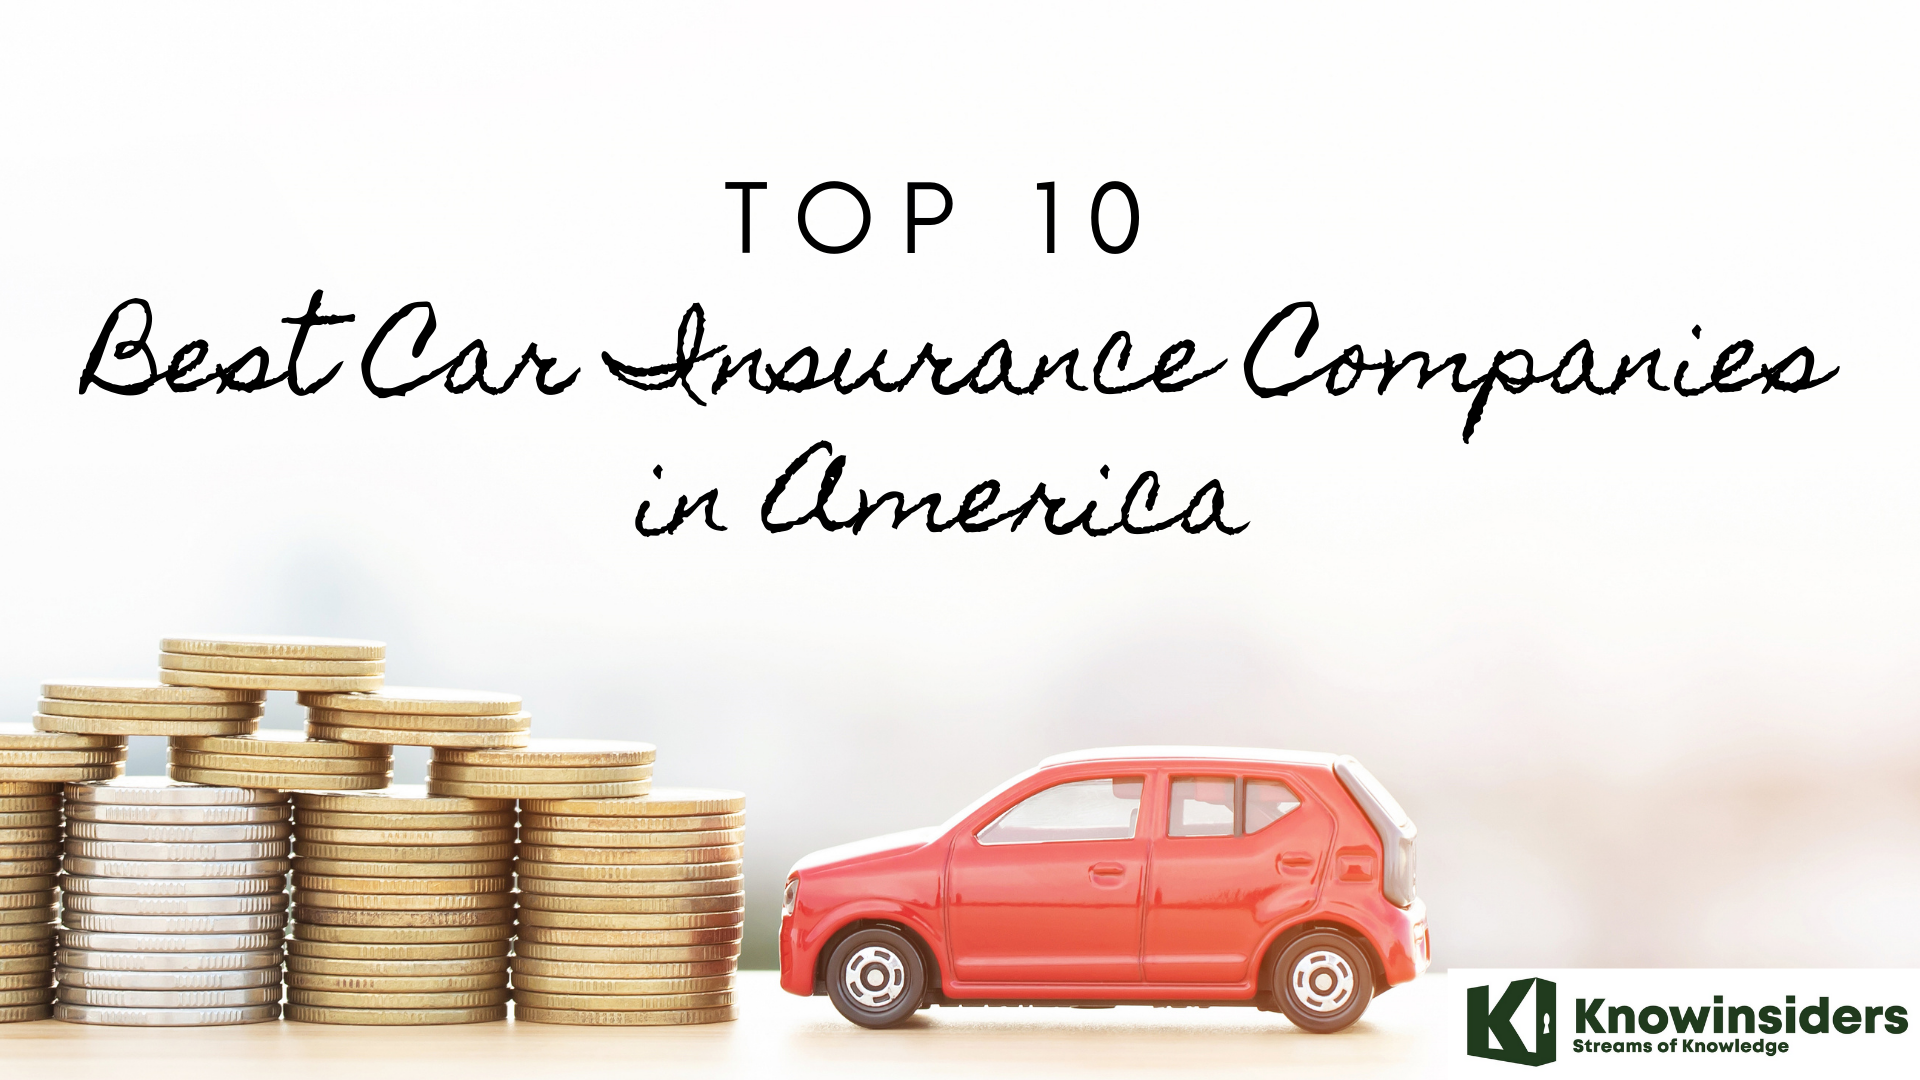 Top 10 Best Car Insurance Companies in the U.S - Cheapest Quotes